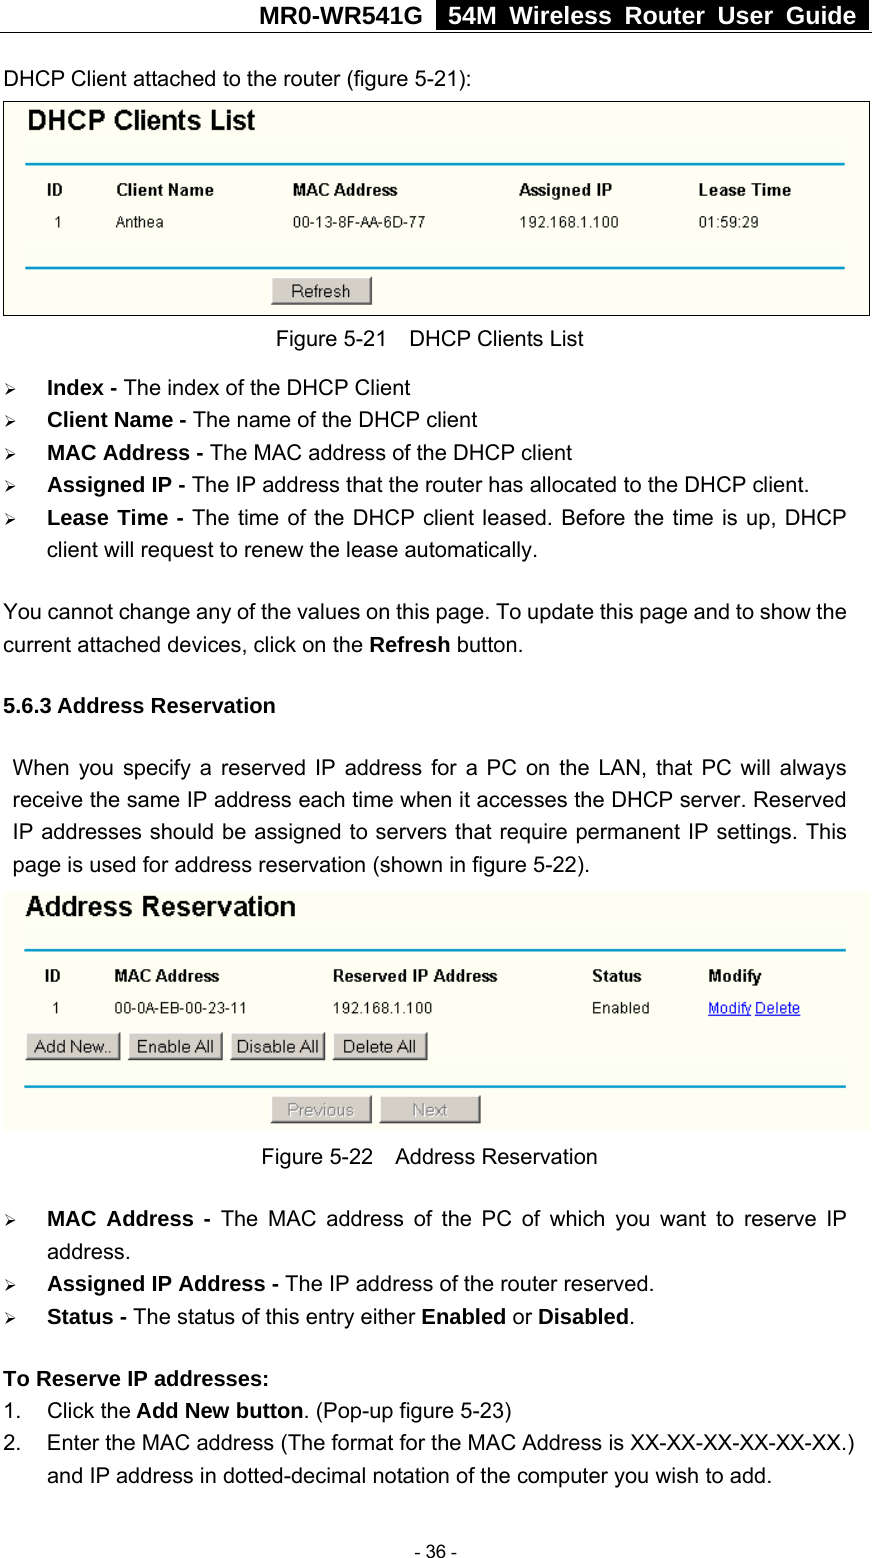 MR0-WR541G   54M Wireless Router User Guide  DHCP Client attached to the router (figure 5-21):  Figure 5-21    DHCP Clients List ¾ Index - The index of the DHCP Client   ¾ Client Name - The name of the DHCP client   ¾ MAC Address - The MAC address of the DHCP client   ¾ Assigned IP - The IP address that the router has allocated to the DHCP client. ¾ Lease Time - The time of the DHCP client leased. Before the time is up, DHCP client will request to renew the lease automatically. You cannot change any of the values on this page. To update this page and to show the current attached devices, click on the Refresh button. 5.6.3 Address Reservation When you specify a reserved IP address for a PC on the LAN, that PC will always receive the same IP address each time when it accesses the DHCP server. Reserved IP addresses should be assigned to servers that require permanent IP settings. This page is used for address reservation (shown in figure 5-22).  Figure 5-22  Address Reservation ¾ MAC Address - The MAC address of the PC of which you want to reserve IP address. ¾ Assigned IP Address - The IP address of the router reserved. ¾ Status - The status of this entry either Enabled or Disabled. To Reserve IP addresses:  1. Click the Add New button. (Pop-up figure 5-23) 2.  Enter the MAC address (The format for the MAC Address is XX-XX-XX-XX-XX-XX.) and IP address in dotted-decimal notation of the computer you wish to add.    - 36 - 